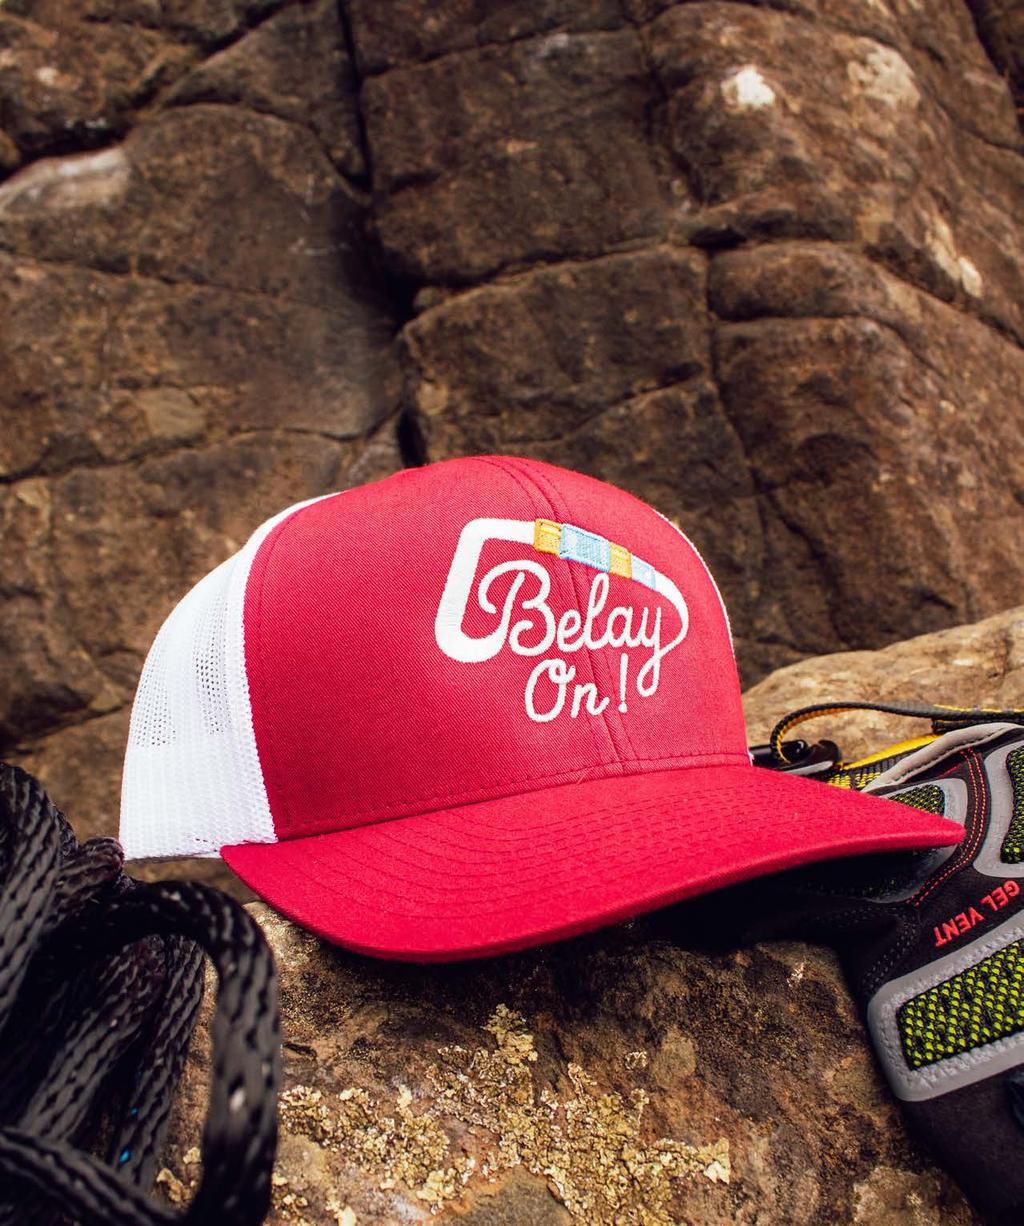 The Trucker Camp Cook Trucker Hat The Trucker Decorated MSRP $23 Show Me Better Adventures The Trucker Decorated MSRP $23 Steelhead The Trucker Decorated MSRP $23 Belay On The Trucker Decorated MSRP